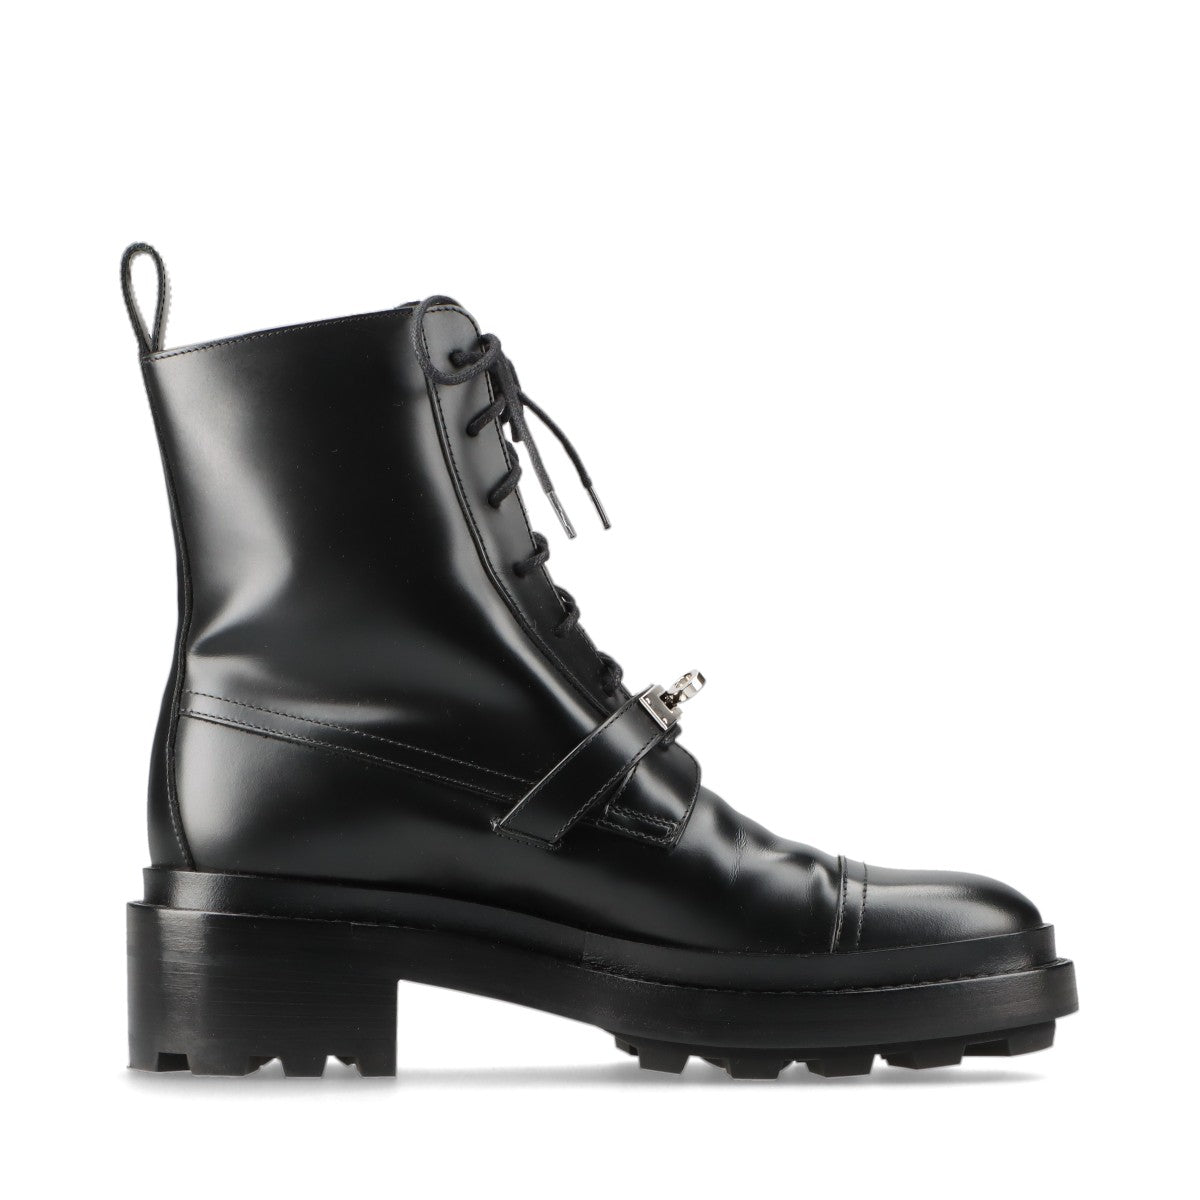 Hermès Funk Leather Short Boots EU38 1/2 Ladies' Black Kelly Metal Fittings Replacement string Box There is a bag